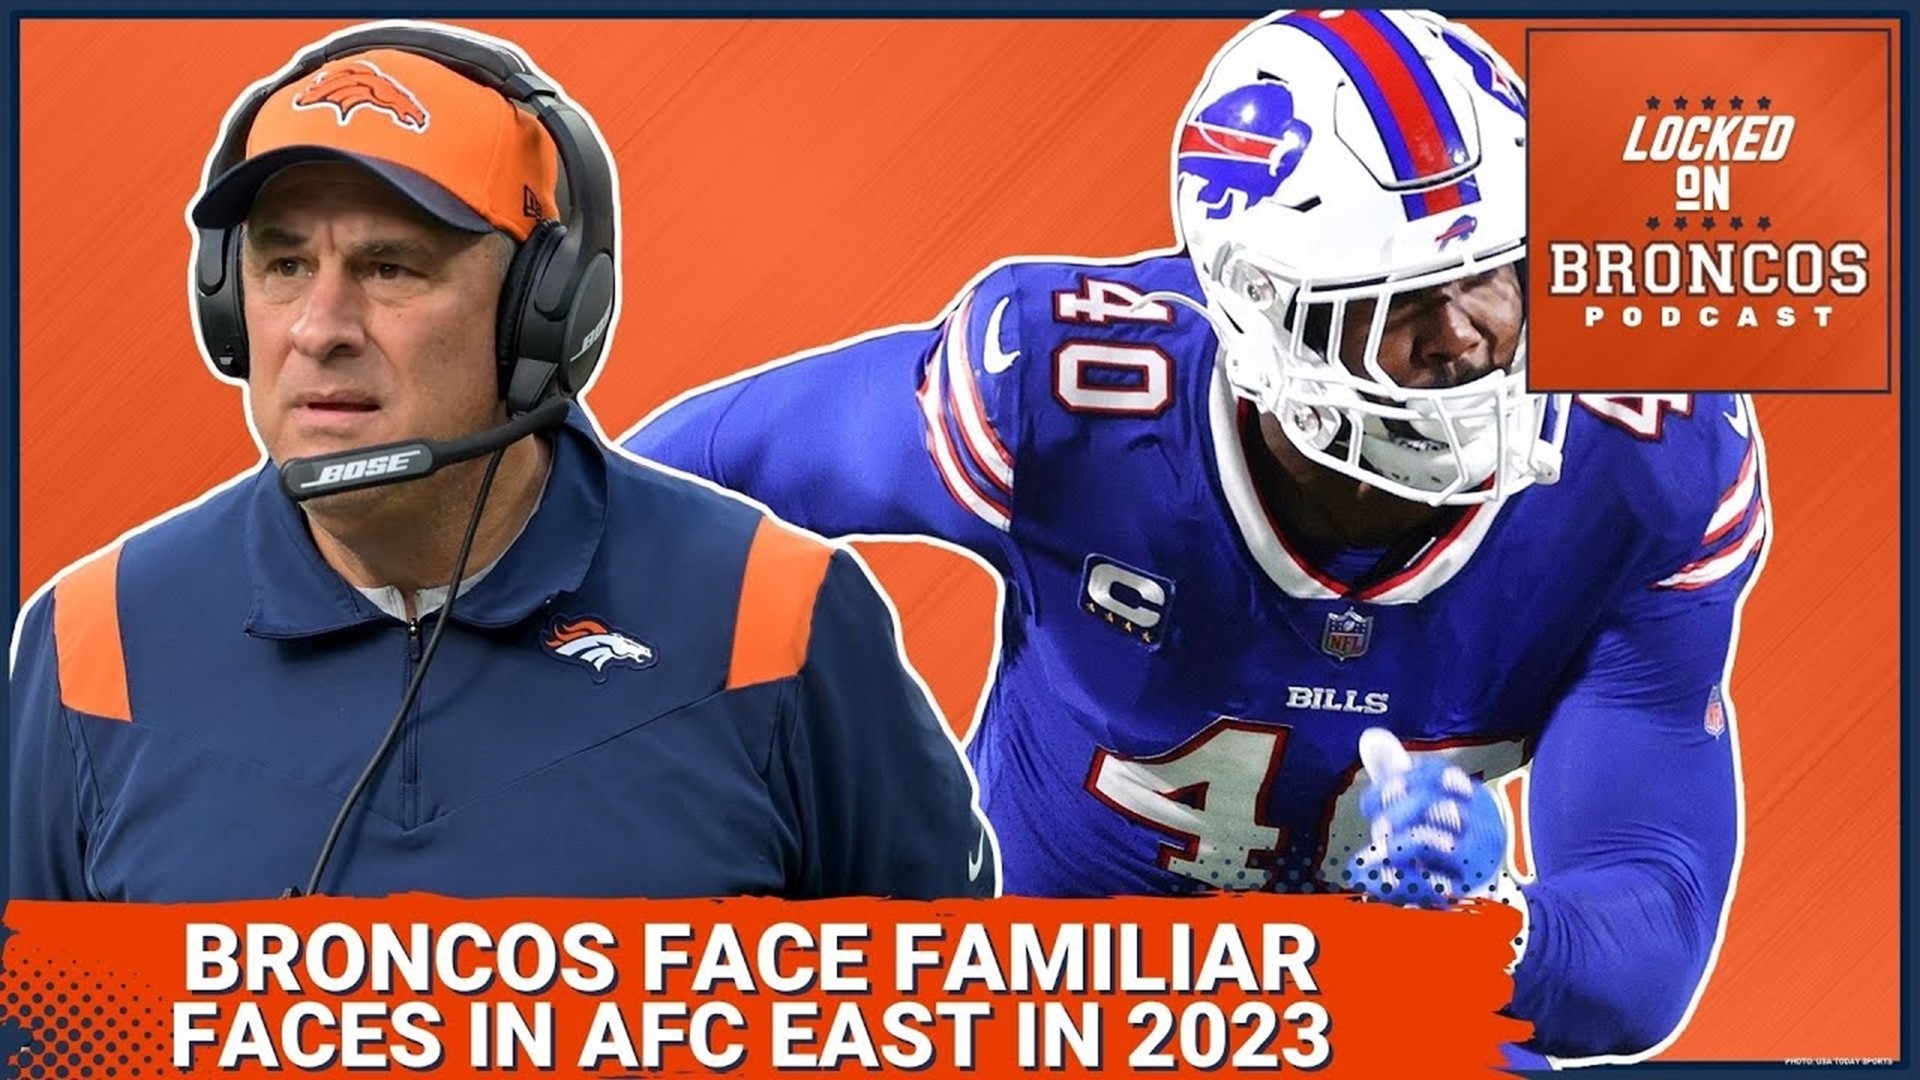 The Denver Broncos face plenty of familiar faces in the AFC East in 2023. How important is it that Denver takes care of business against a tough division?